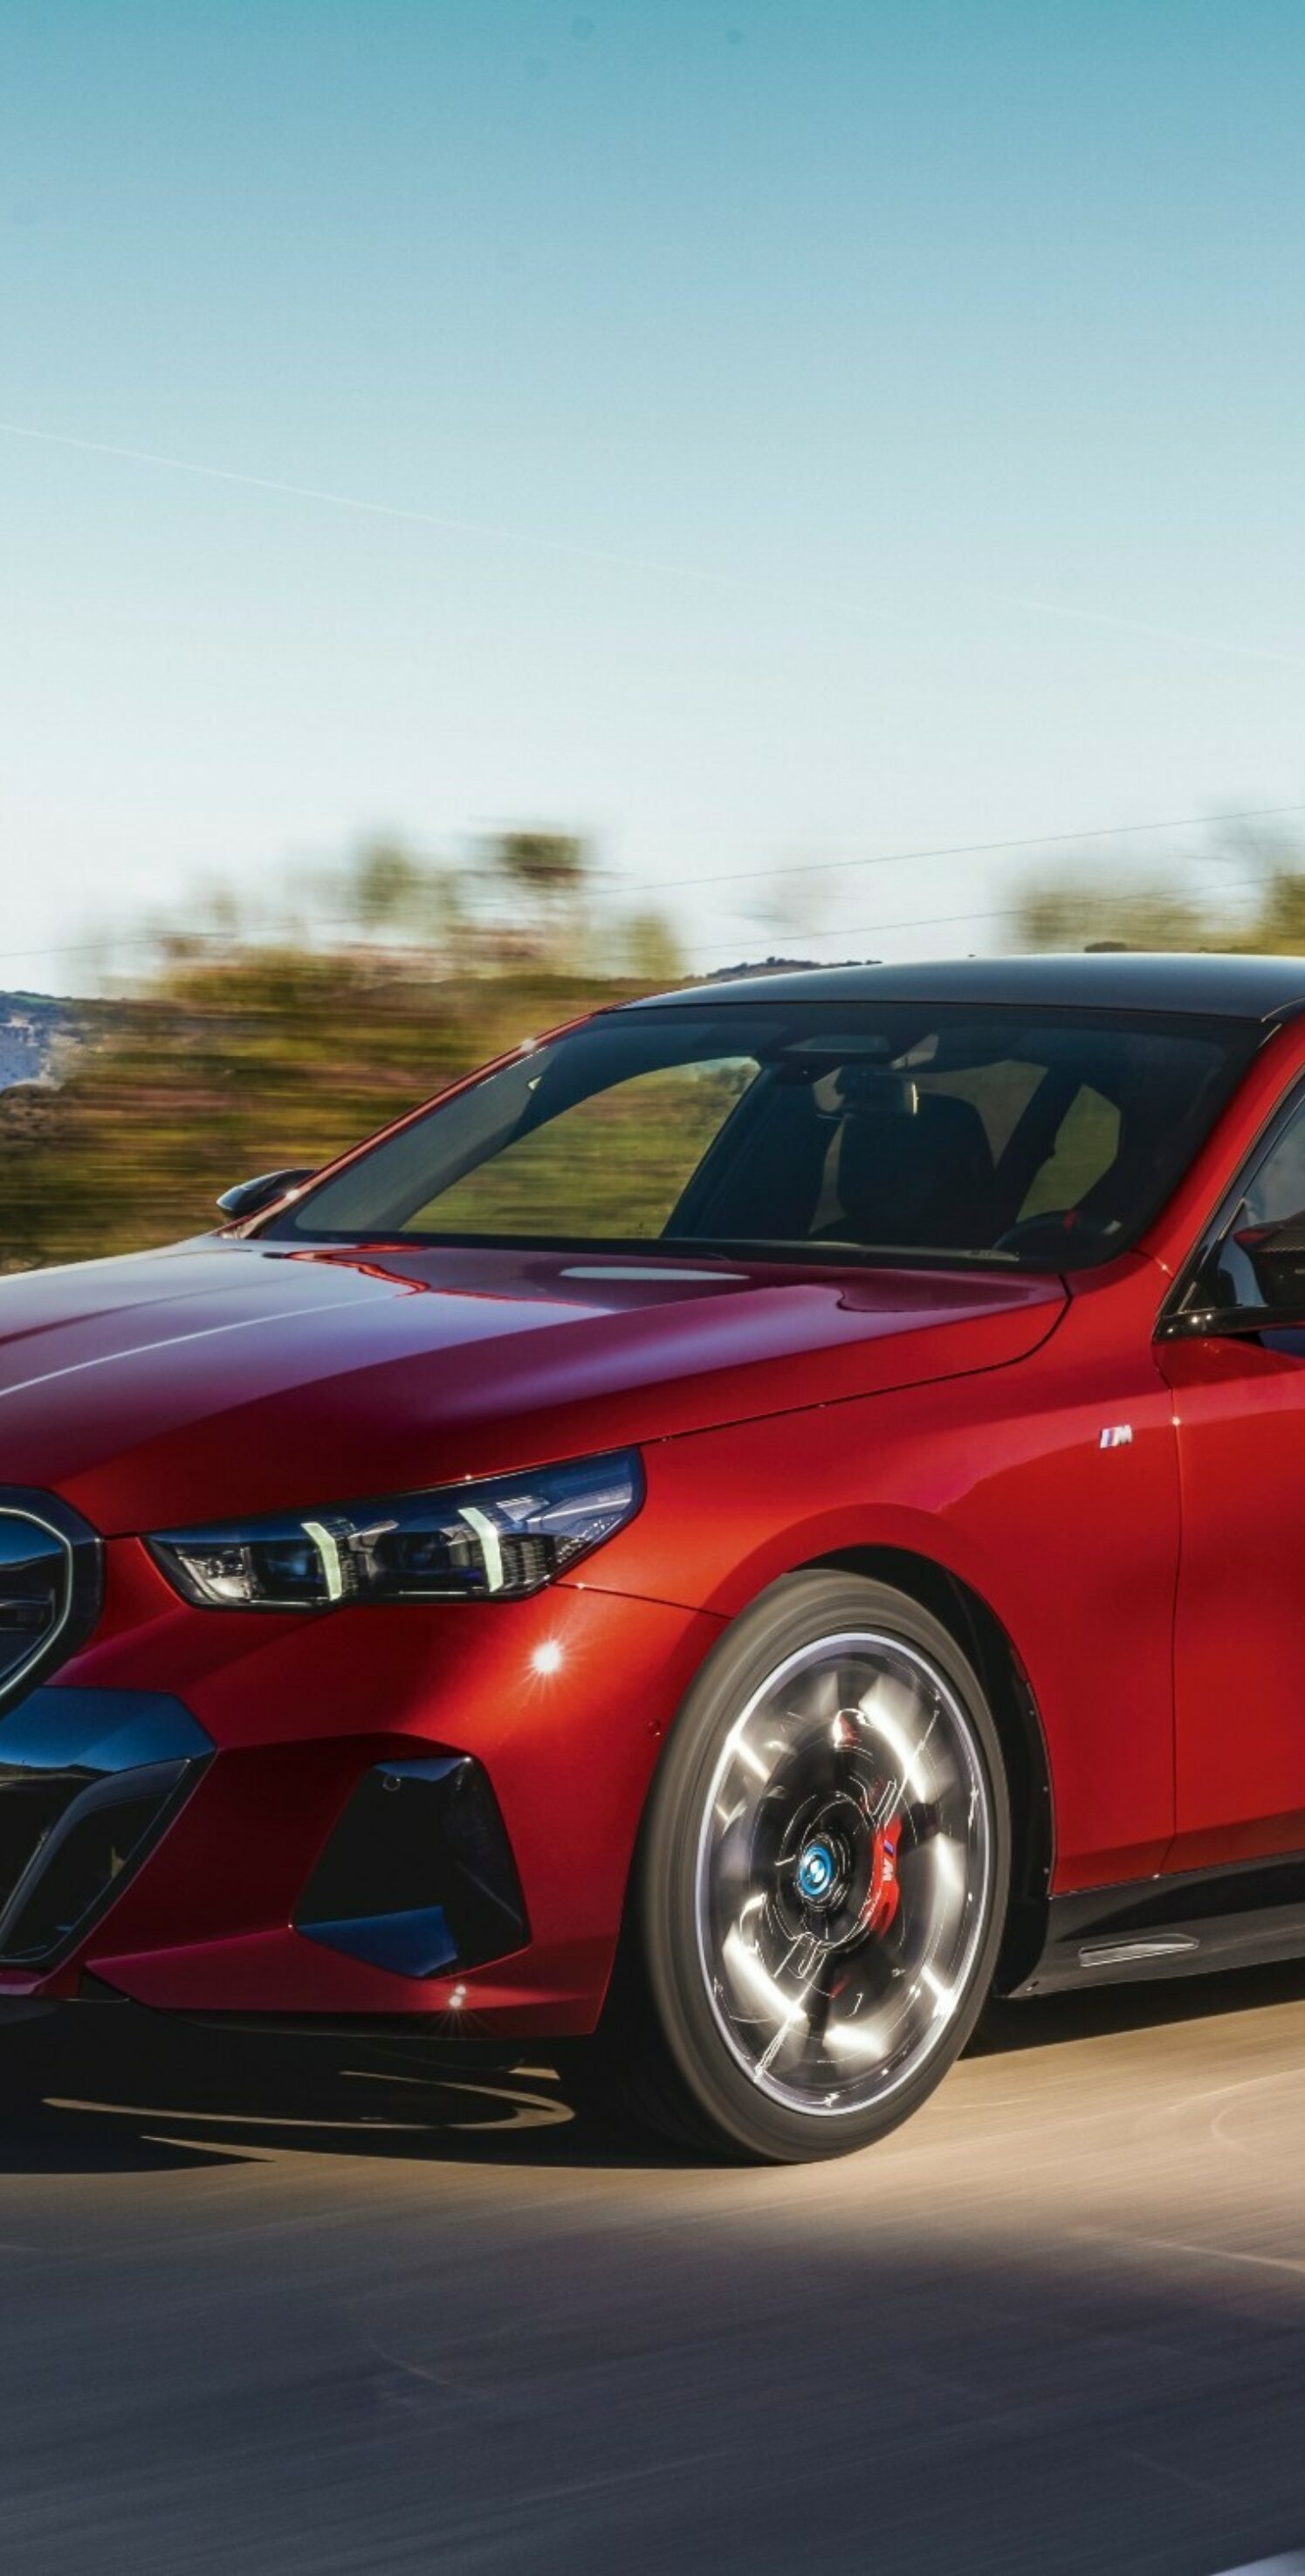 https://autofilter.sk/assets/images/i5/gallery/P90505042_lowRes_the-new-bmw-i5-m60-x.jpg - obrazok